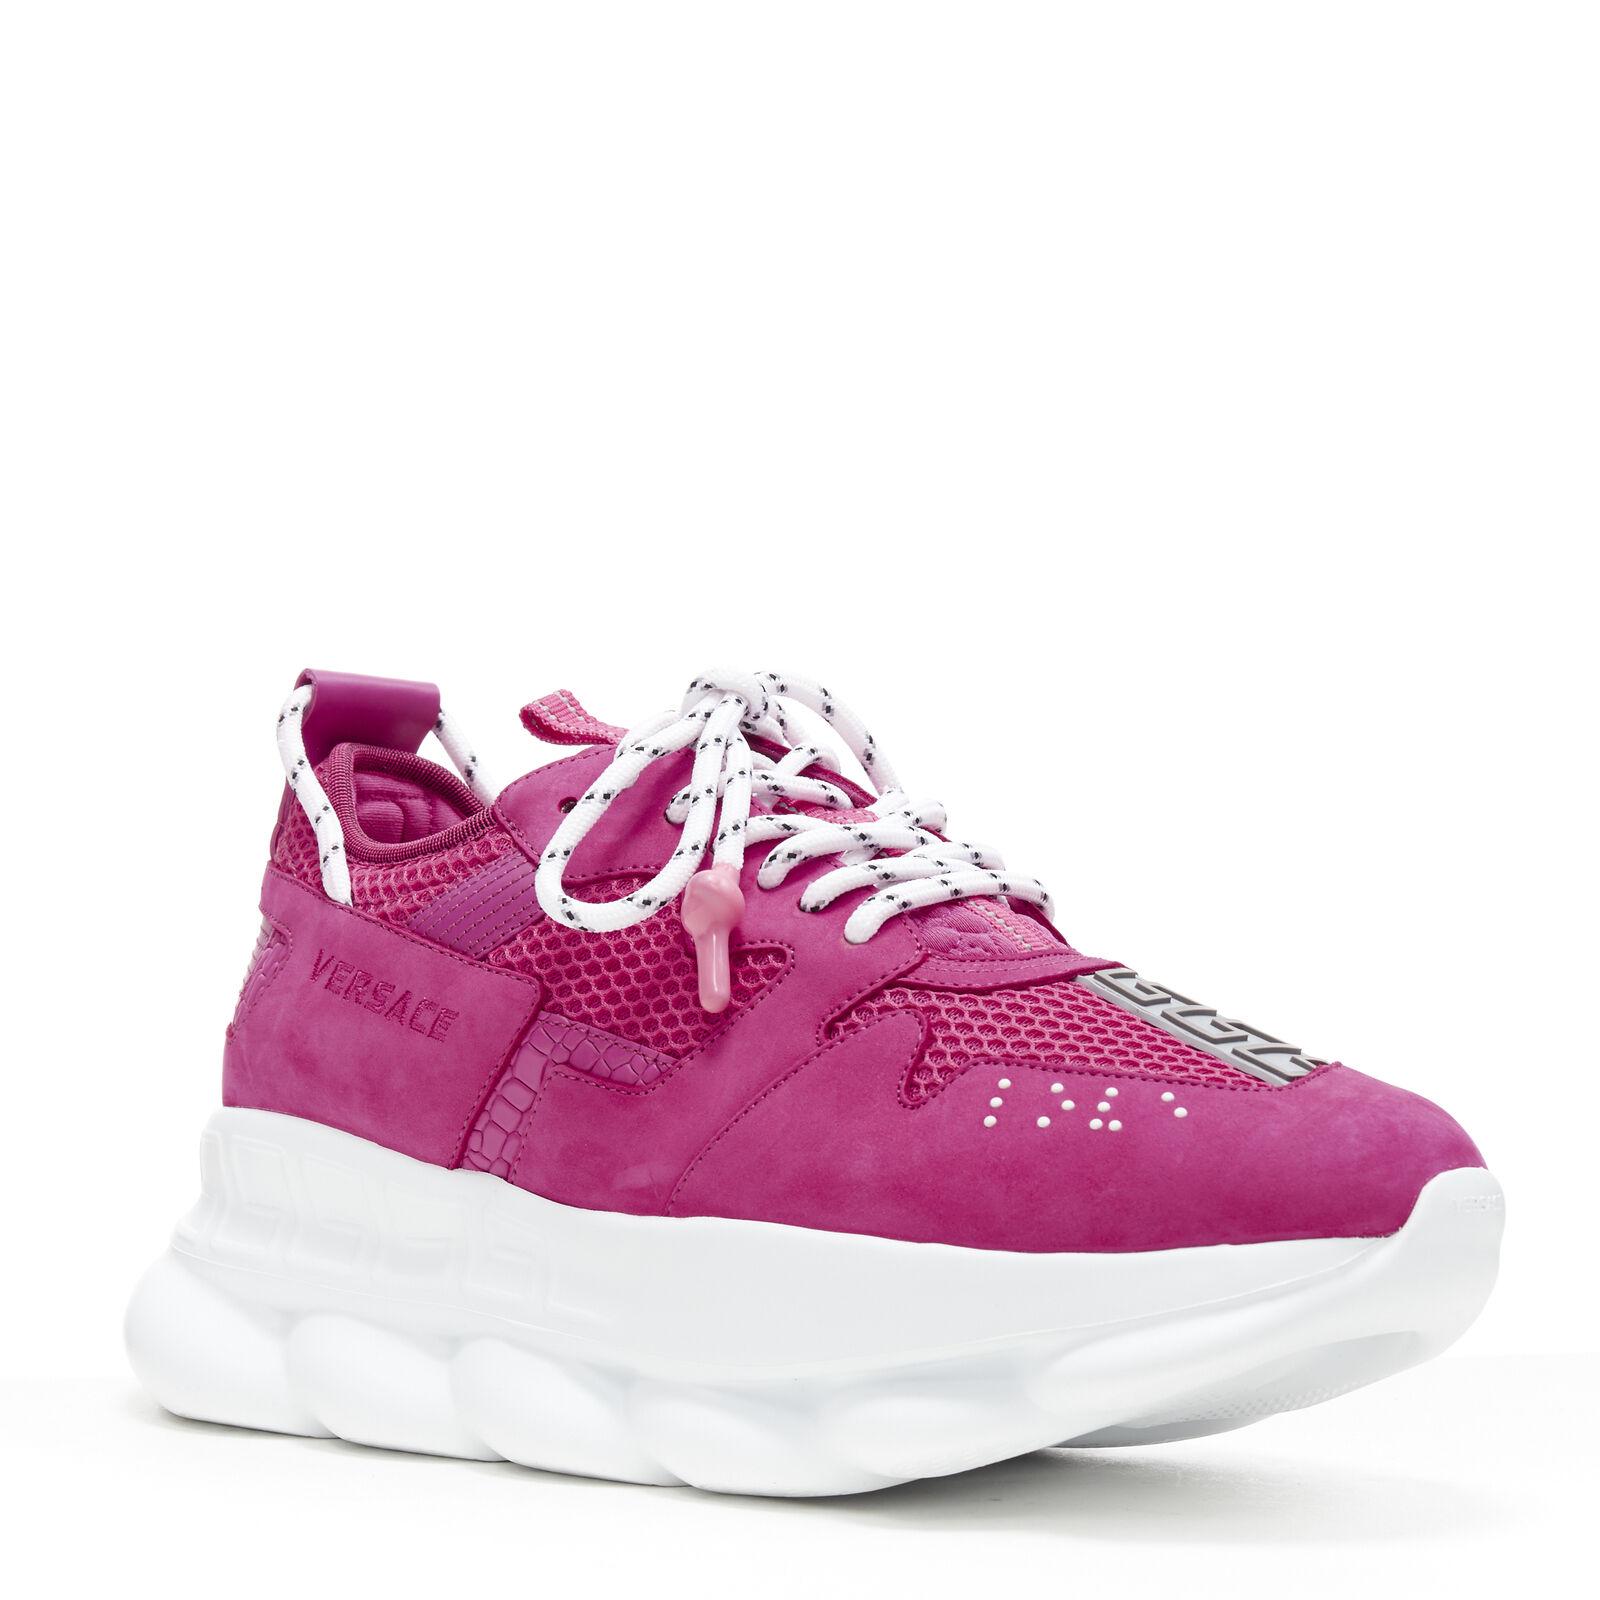 new VERSACE Chain Reaction Blowzy shocking pink suede chunky dad sneaker EU39.5
Reference: TGAS/B01348
Brand: Versace
Designer: Salehe Bembury
Model: Versace Chain Reaction
Material: Fabric, Leather
Color: Pink
Pattern: Solid
Closure: Lace